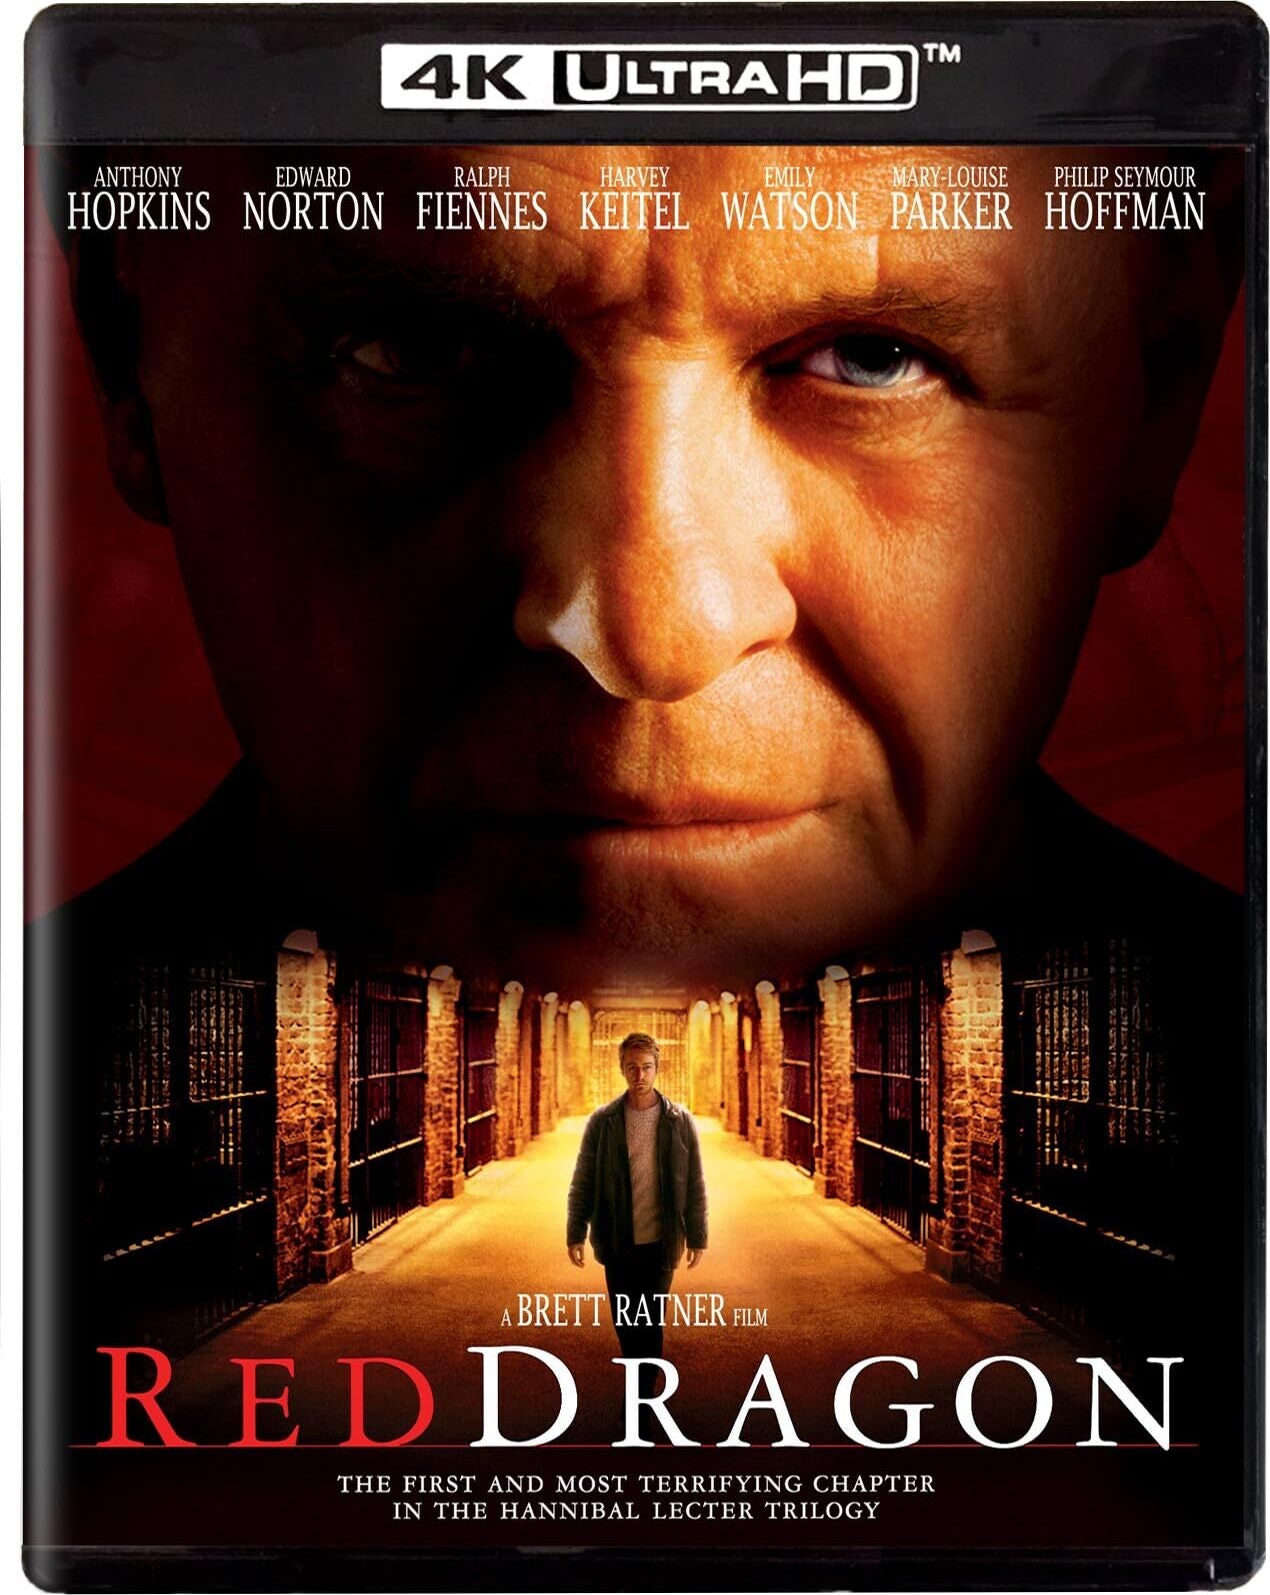 RED DRAGON (2002)